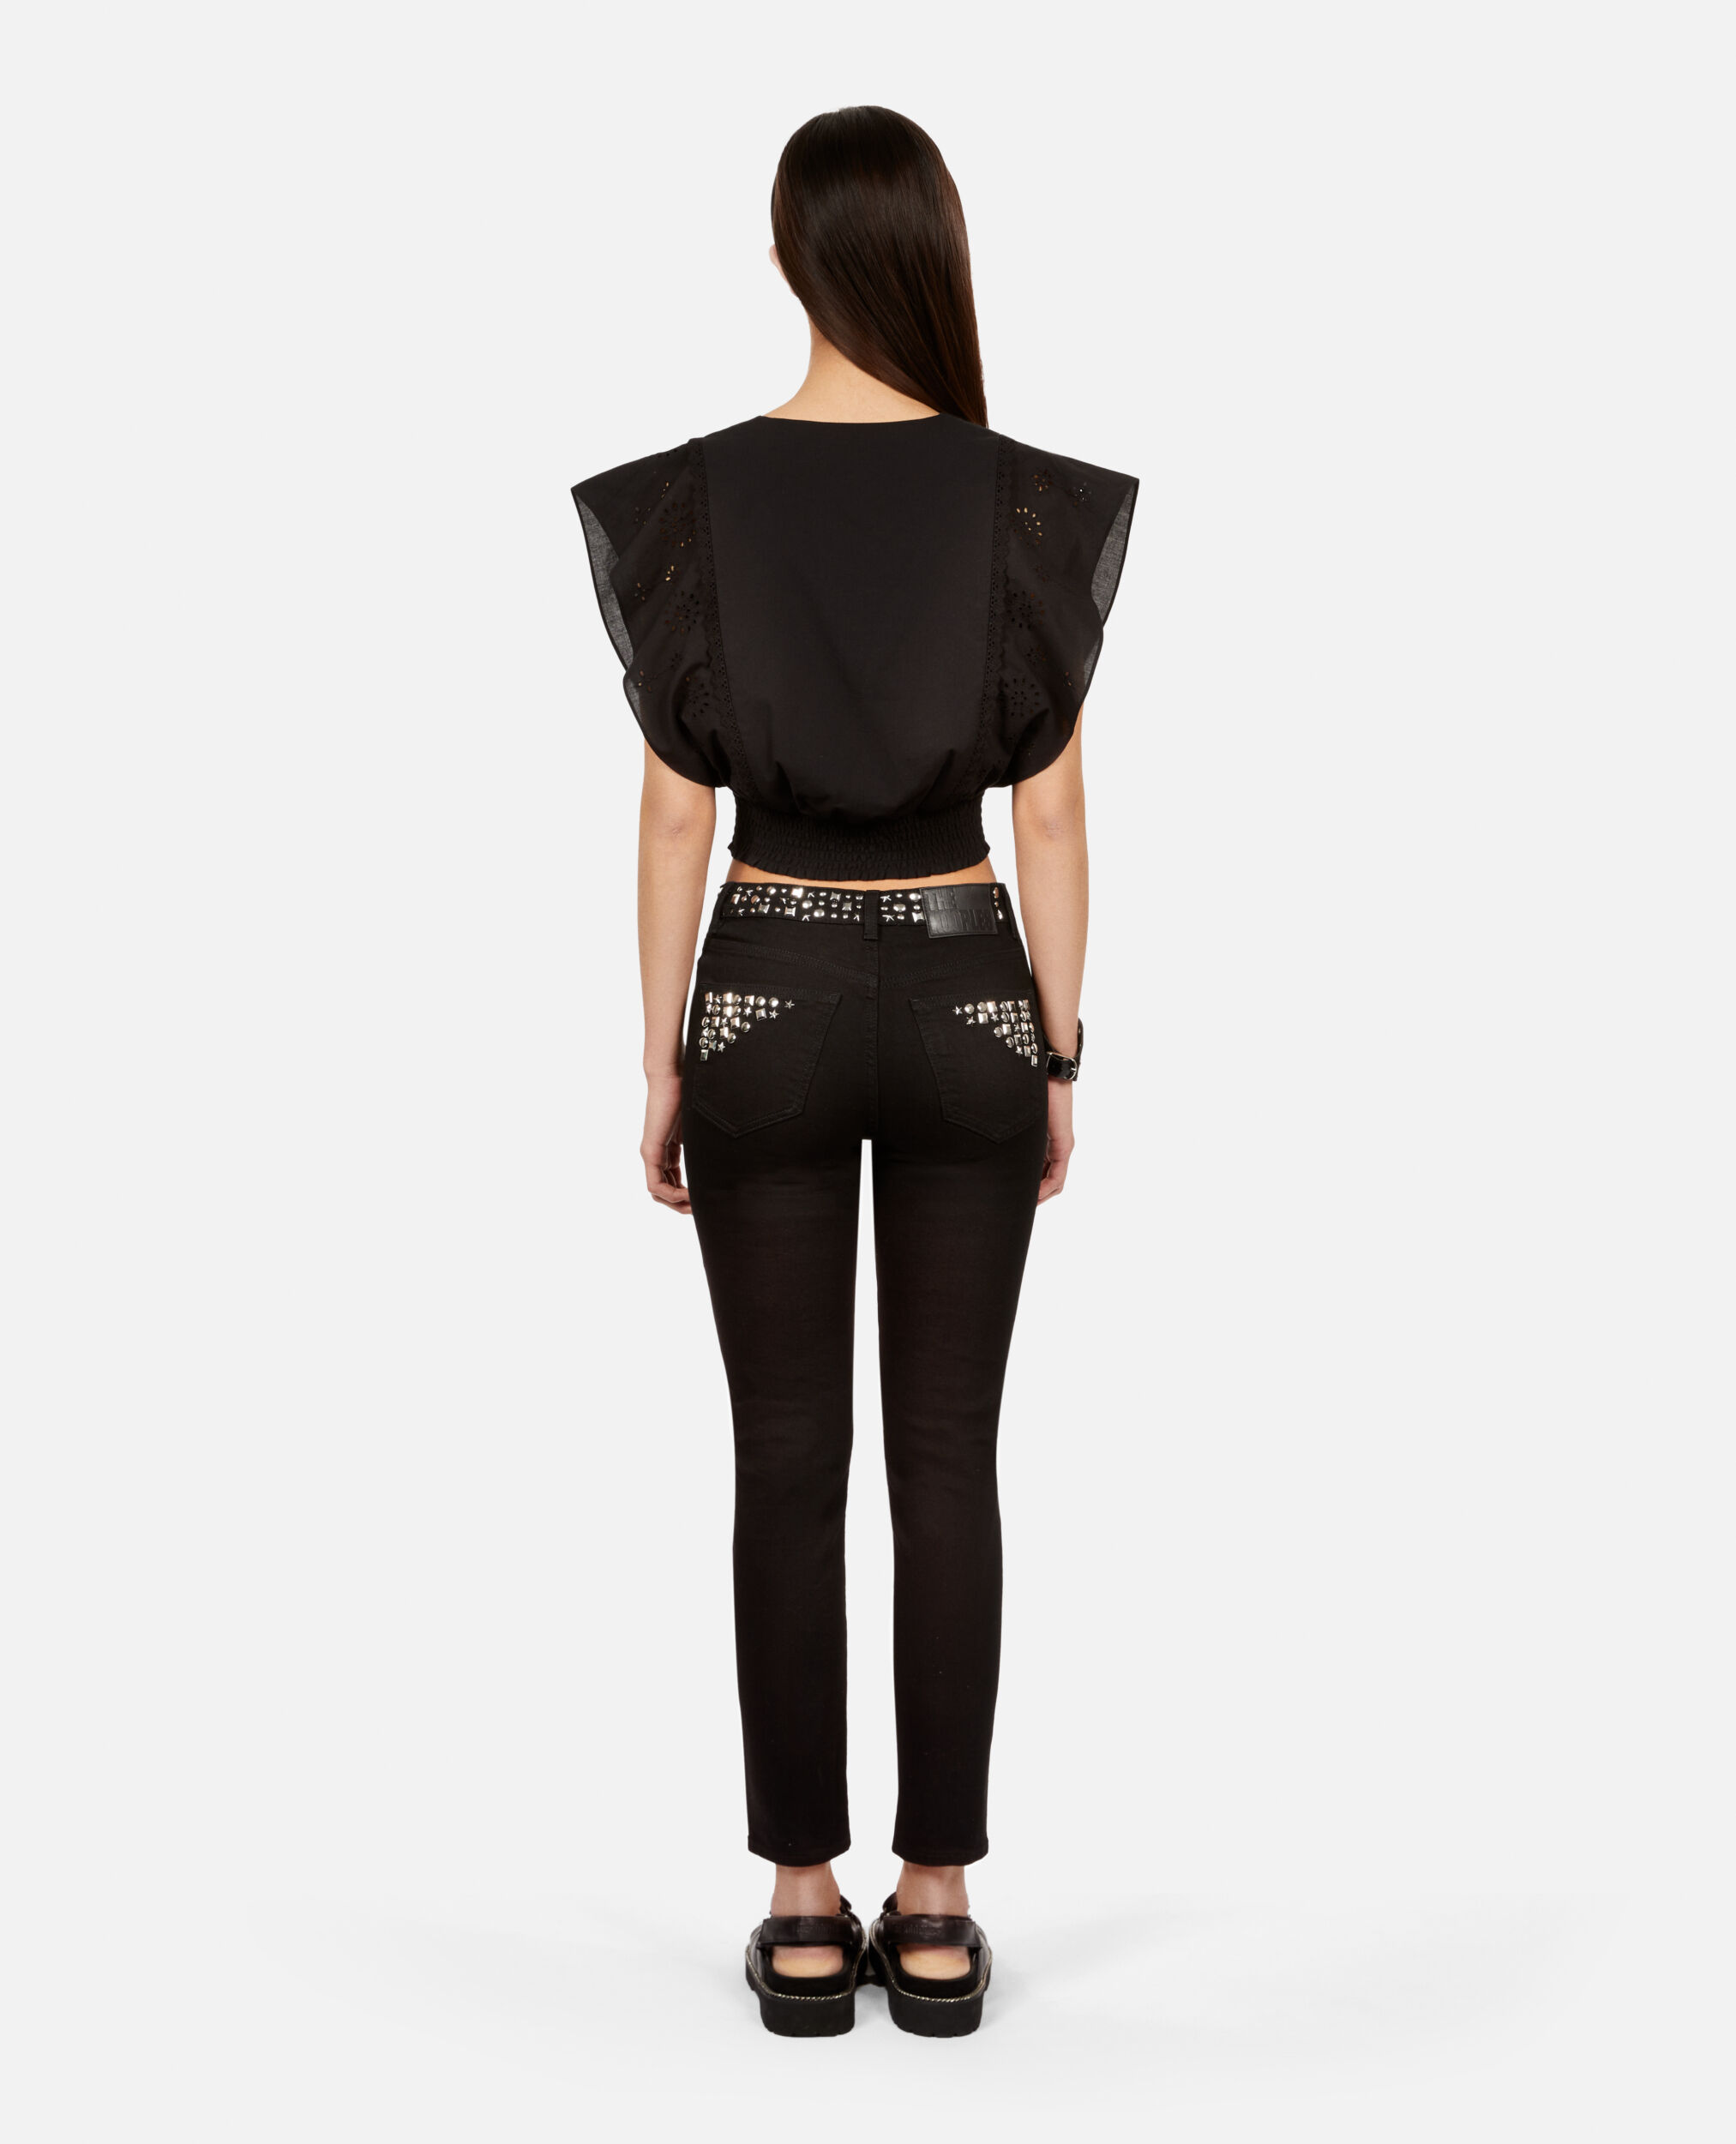 Black slim jeans with studs and stars, BLACK WASHED, hi-res image number null